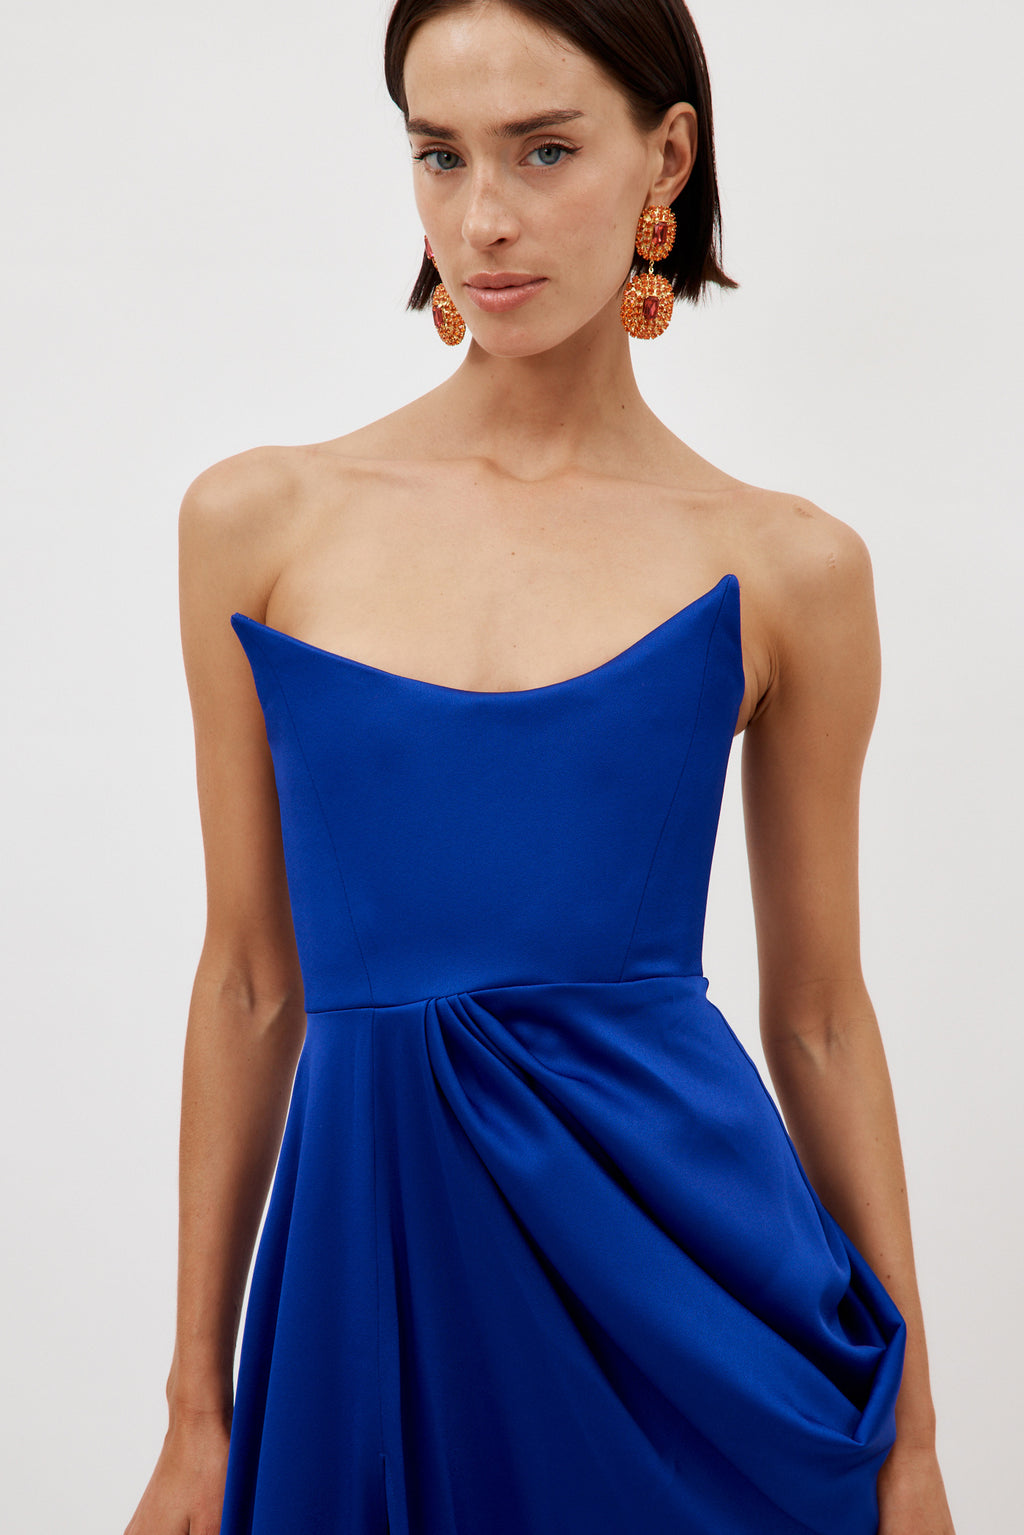 Satin Crepe Curved Strapless Drape Ultramarine Gown